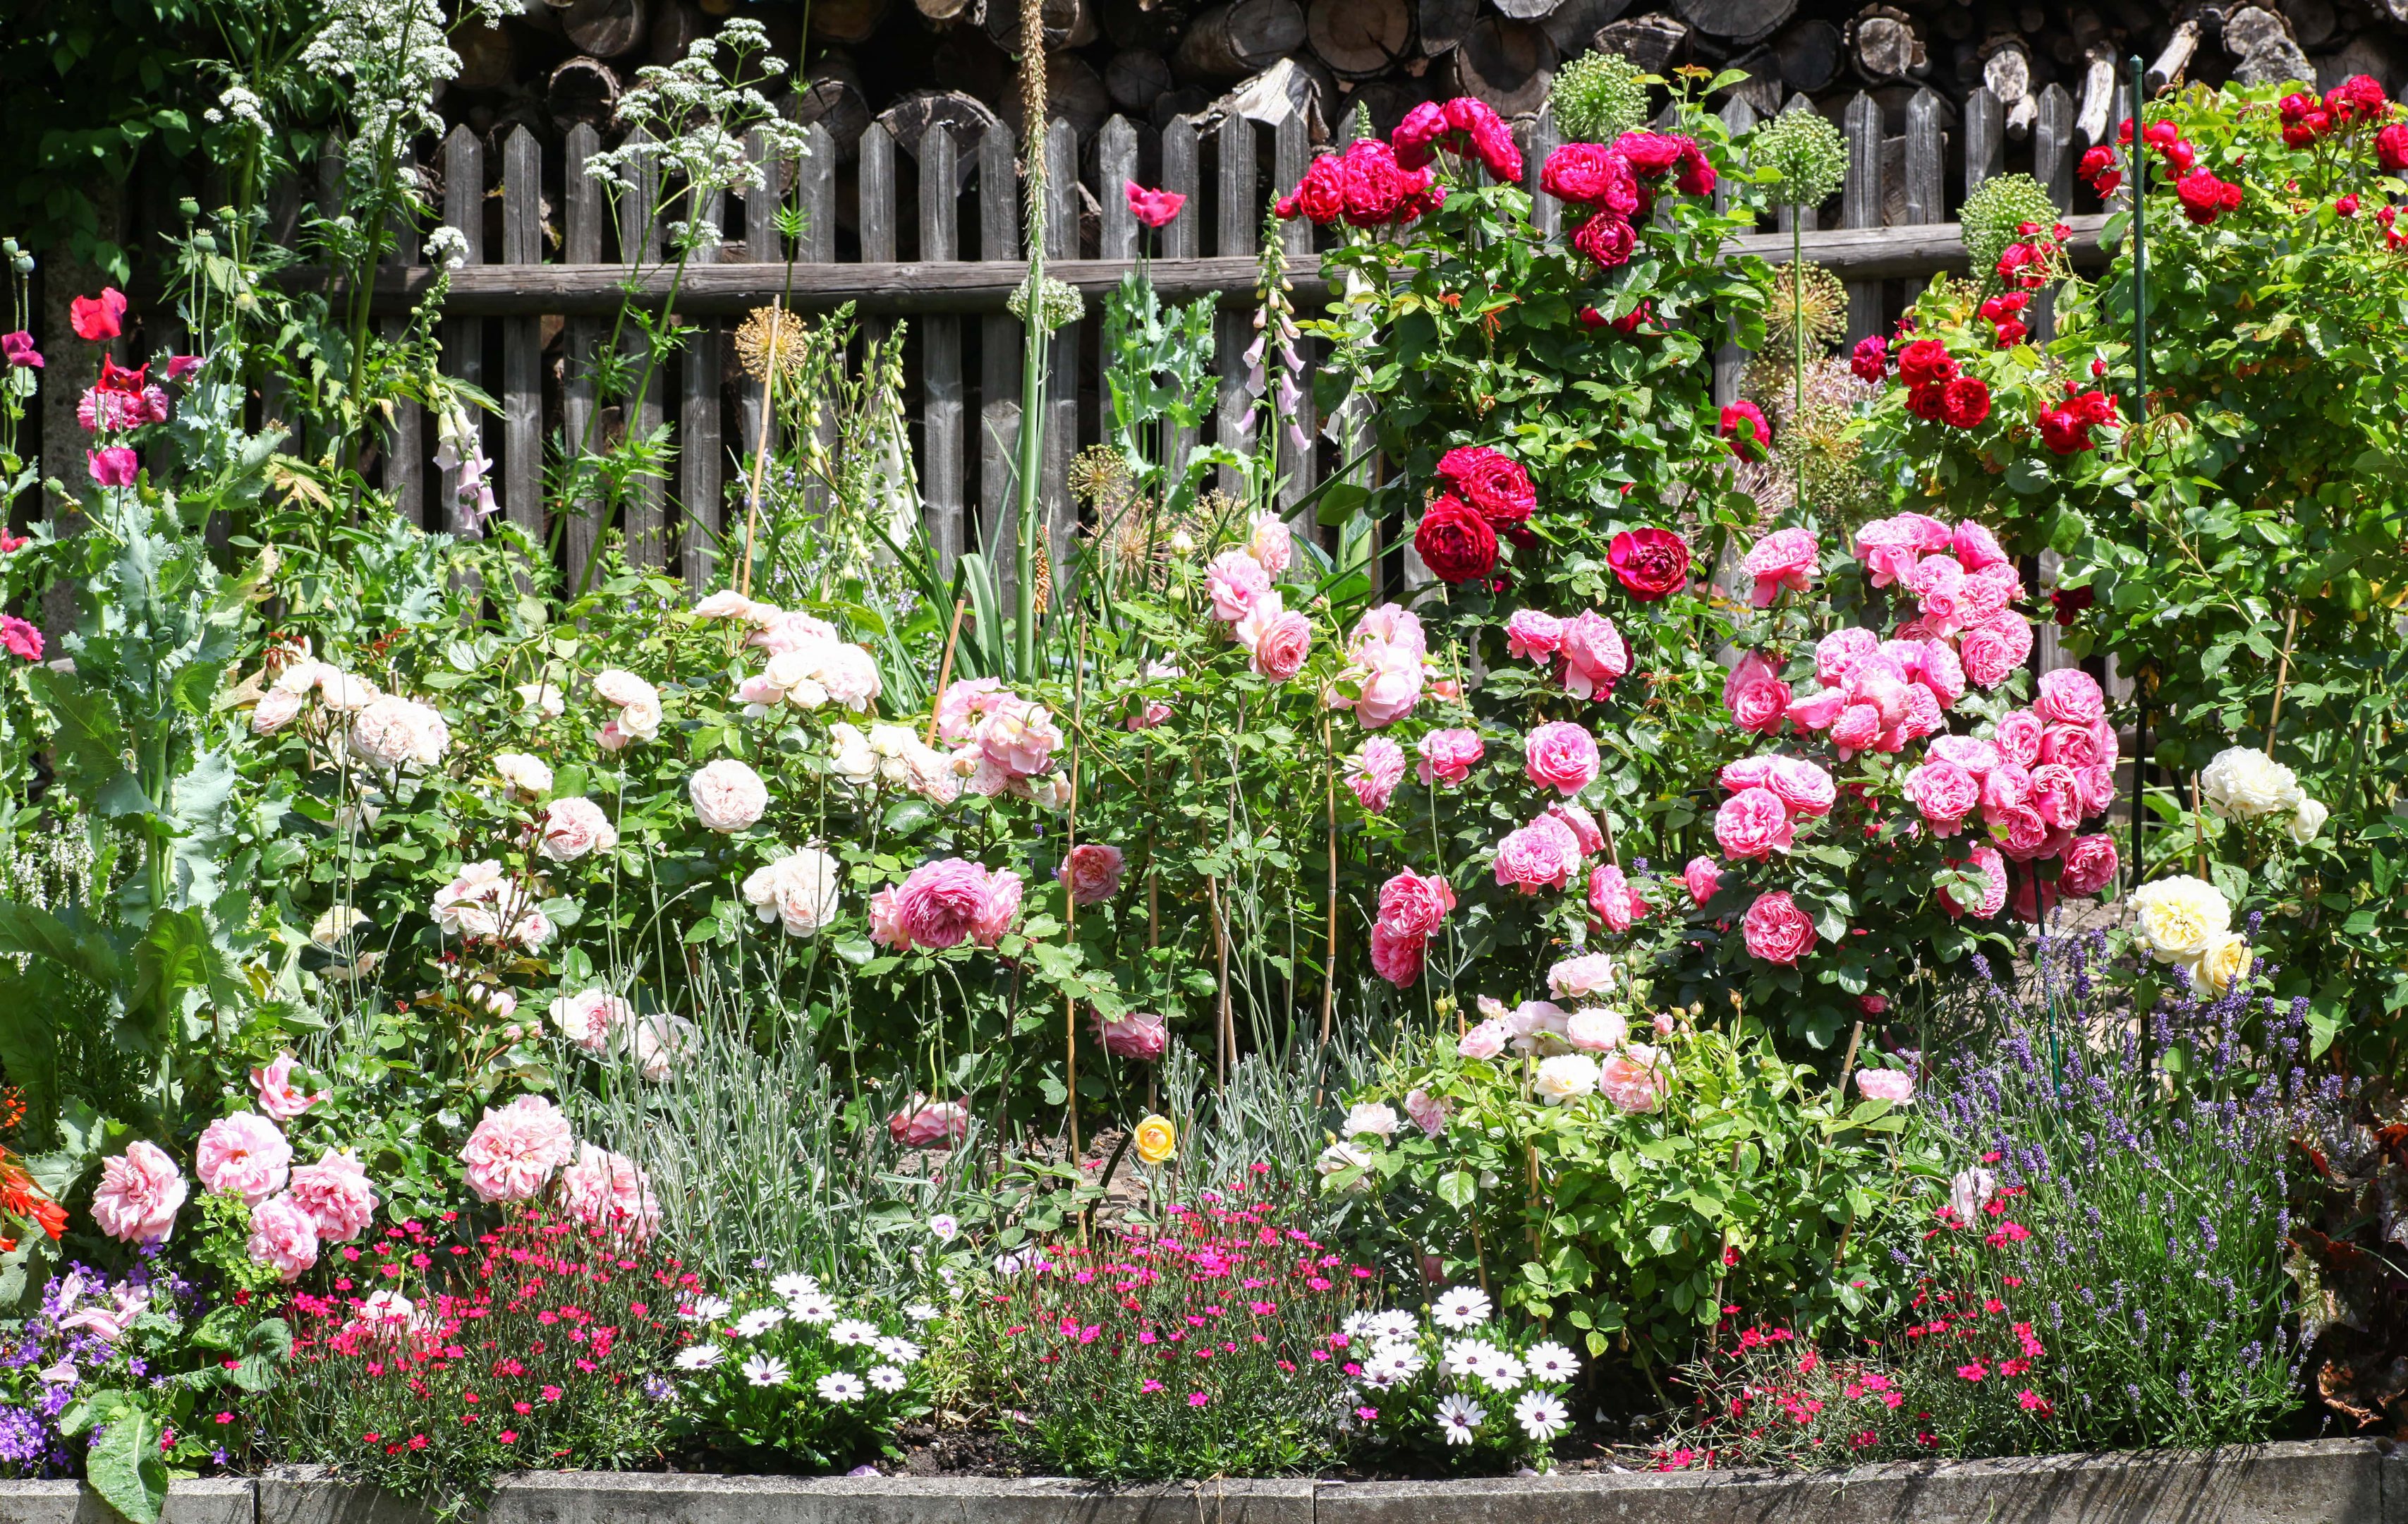 A beautiful mix of rose bushes and colorful flowers in a garden bed